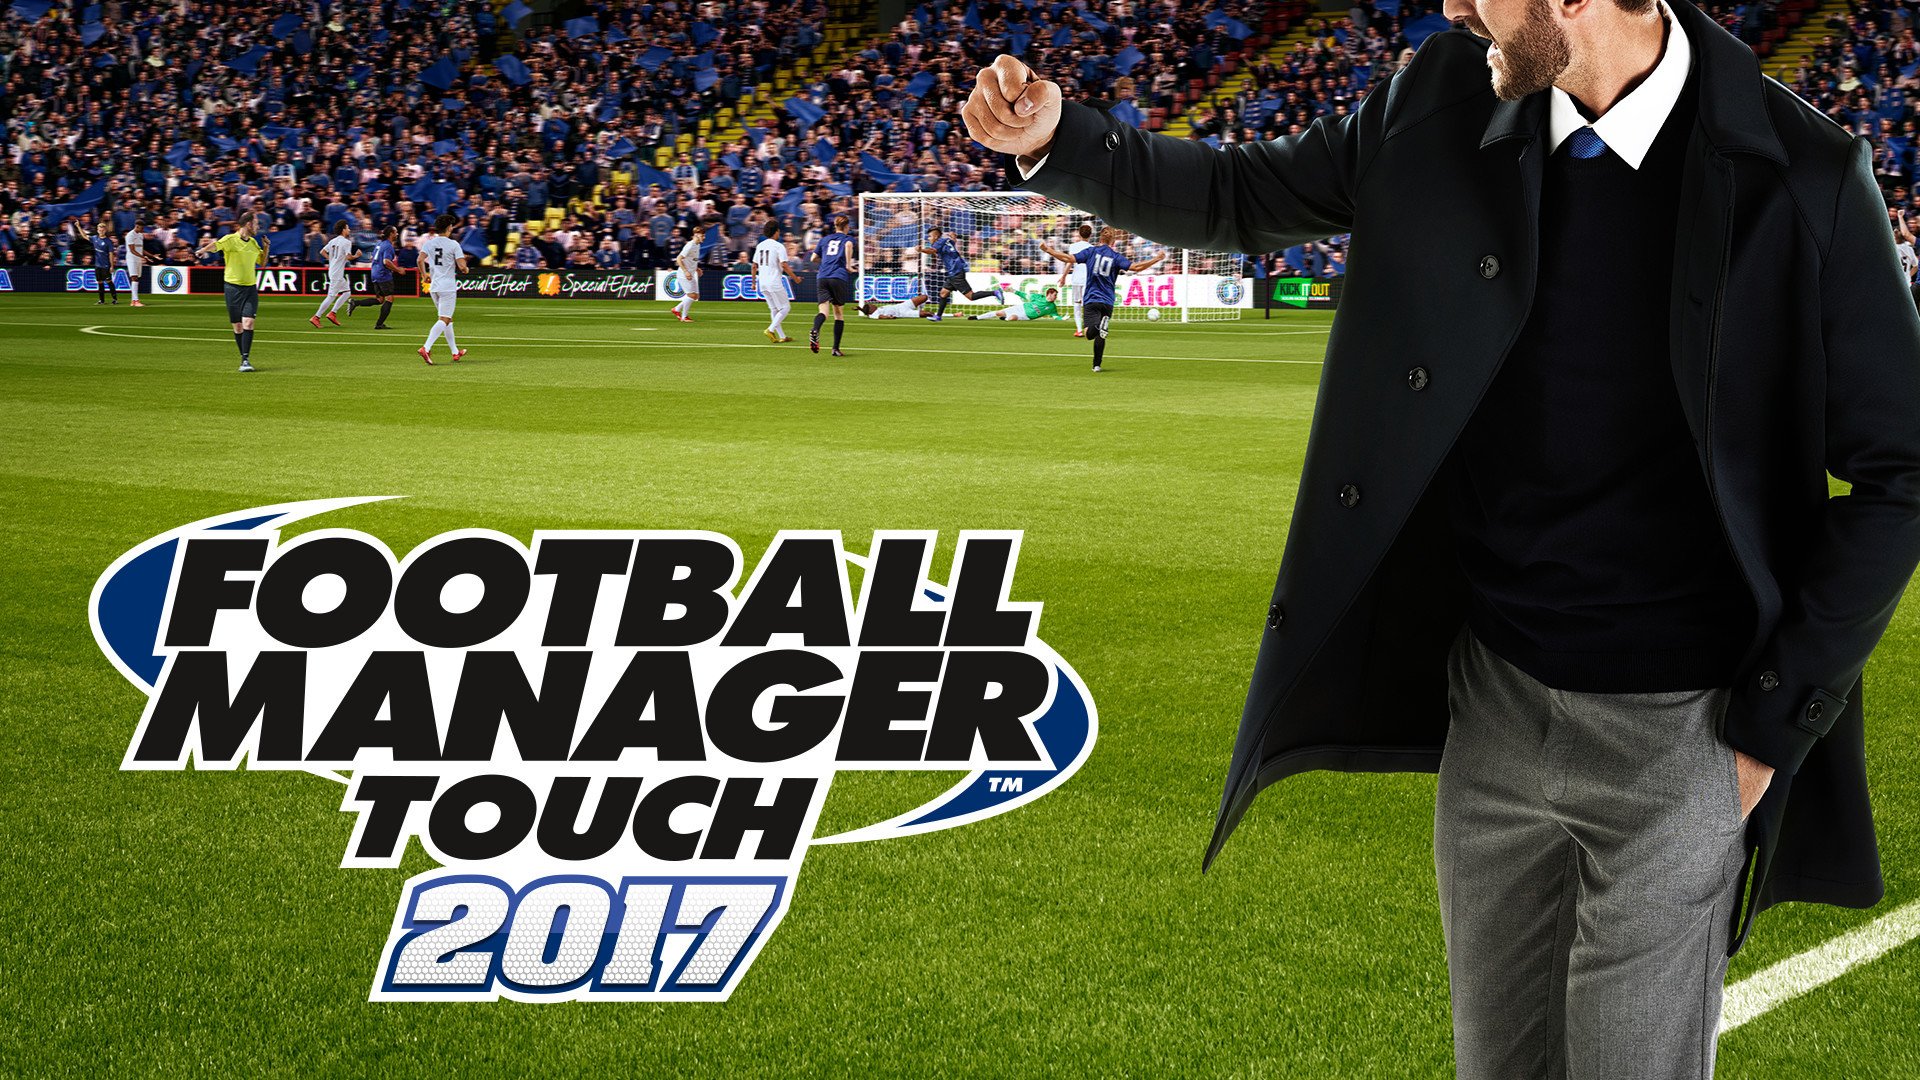 Football Manager Touch 2017 - Mac [Online Game Code]